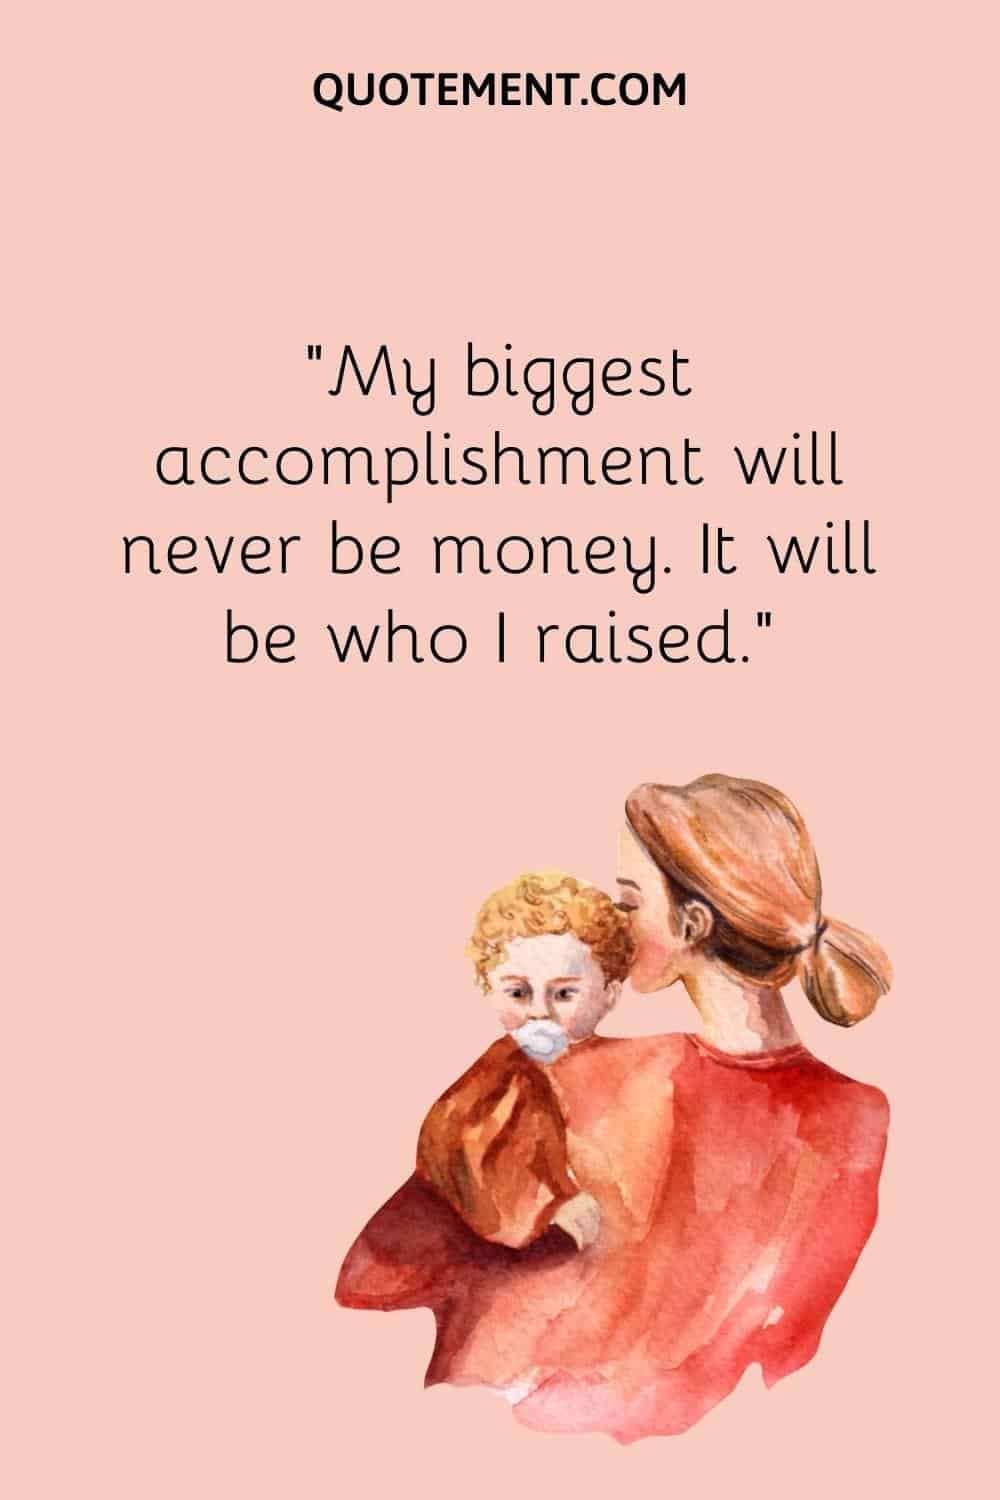 “My biggest accomplishment will never be money. It will be who I raised.”